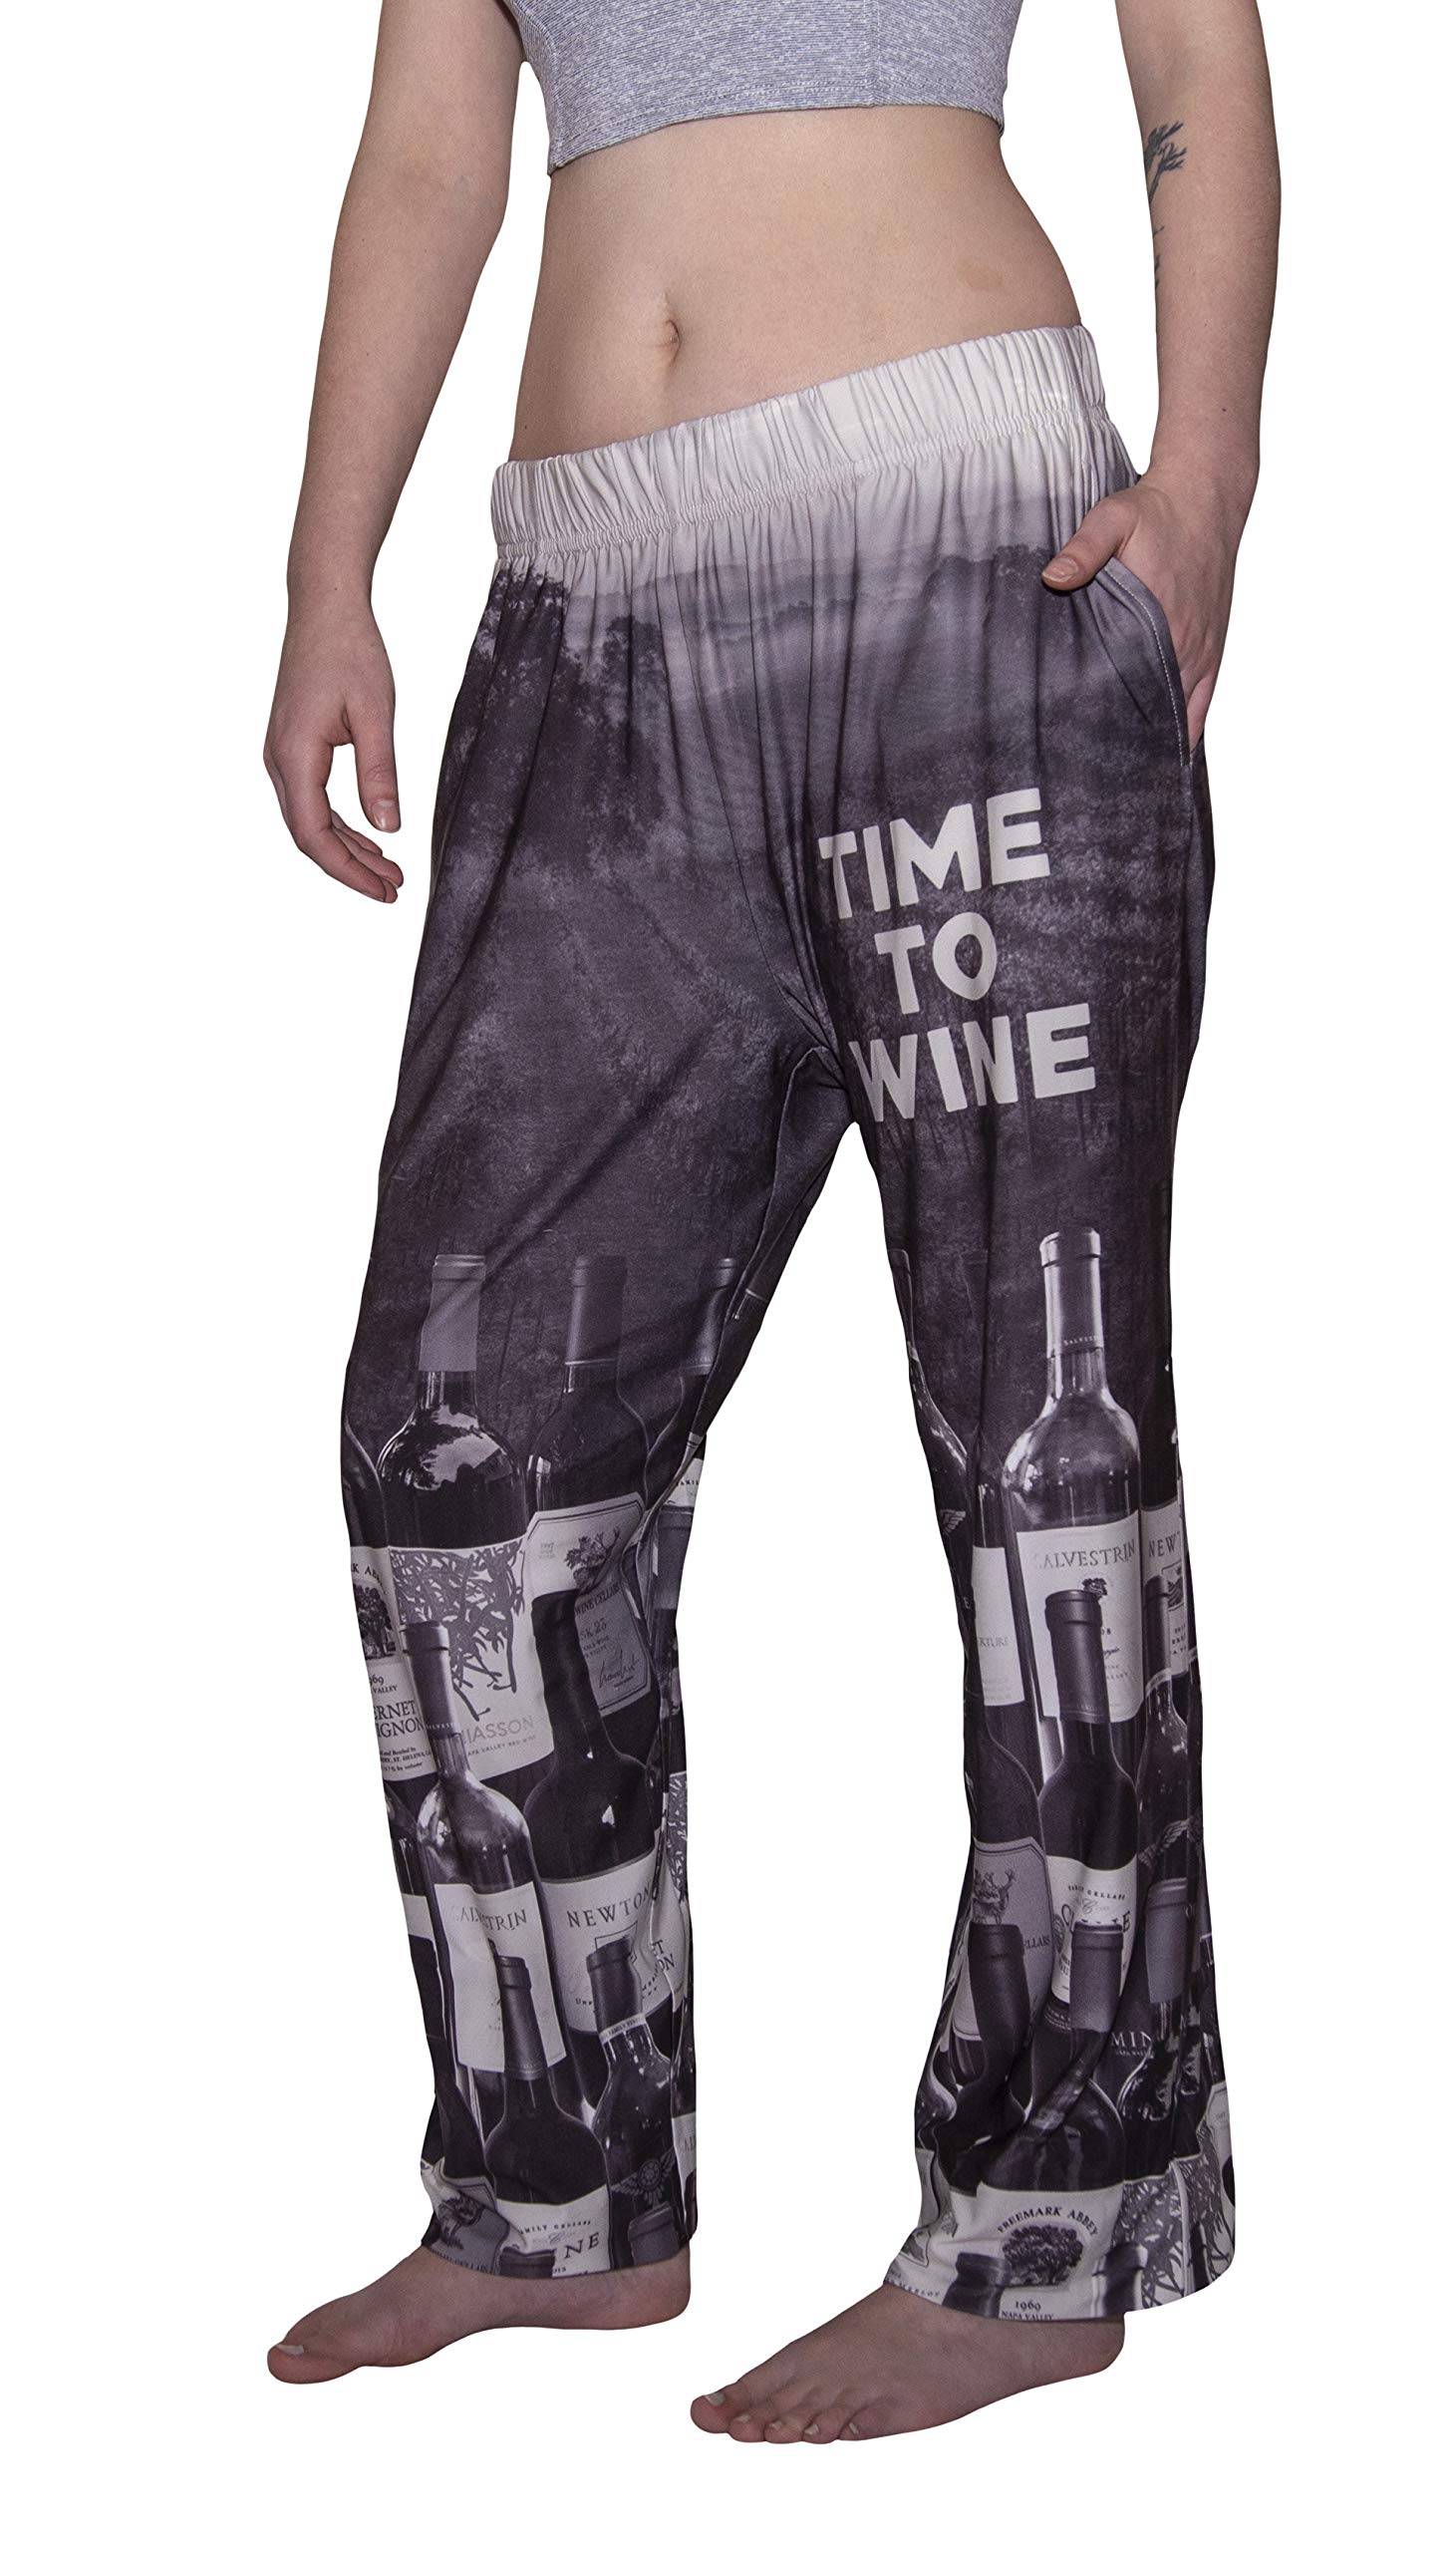 Waist down photo of model wearing Time To Wine pajama lounge pants side view (white background)